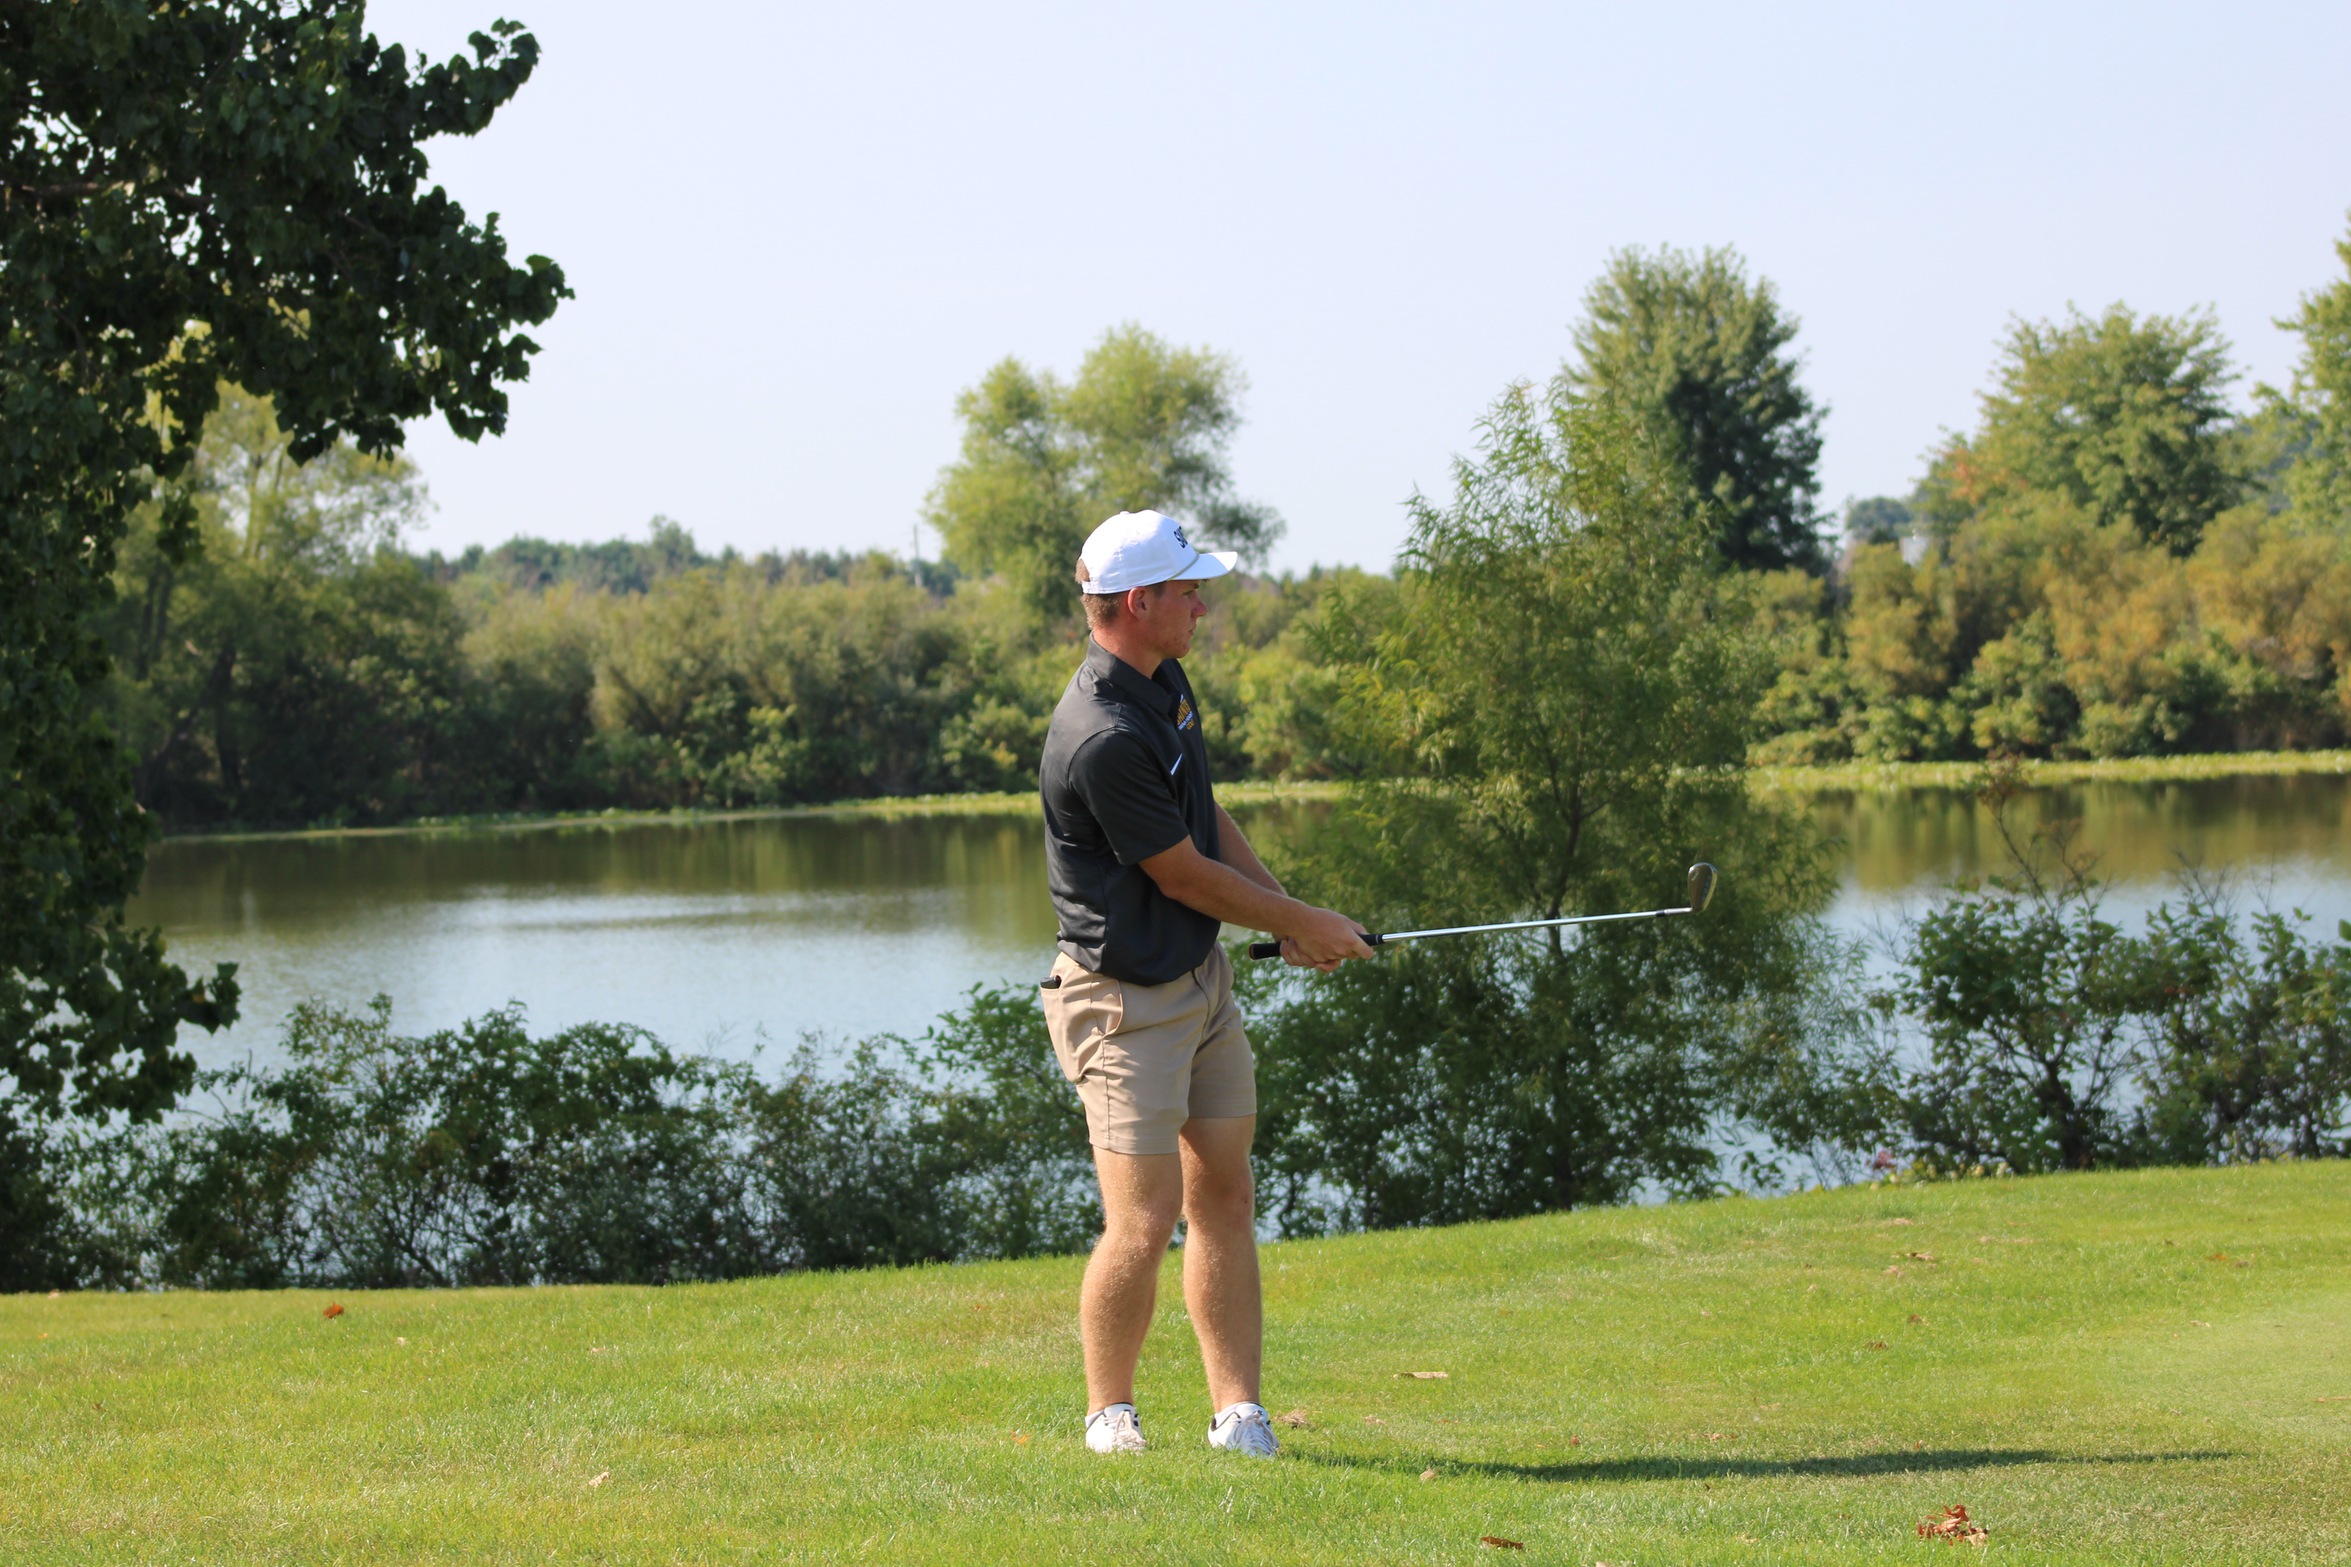 Men's Golf B Team Fills in At Zollner and Finishes in Eighth Place at Trine Invite